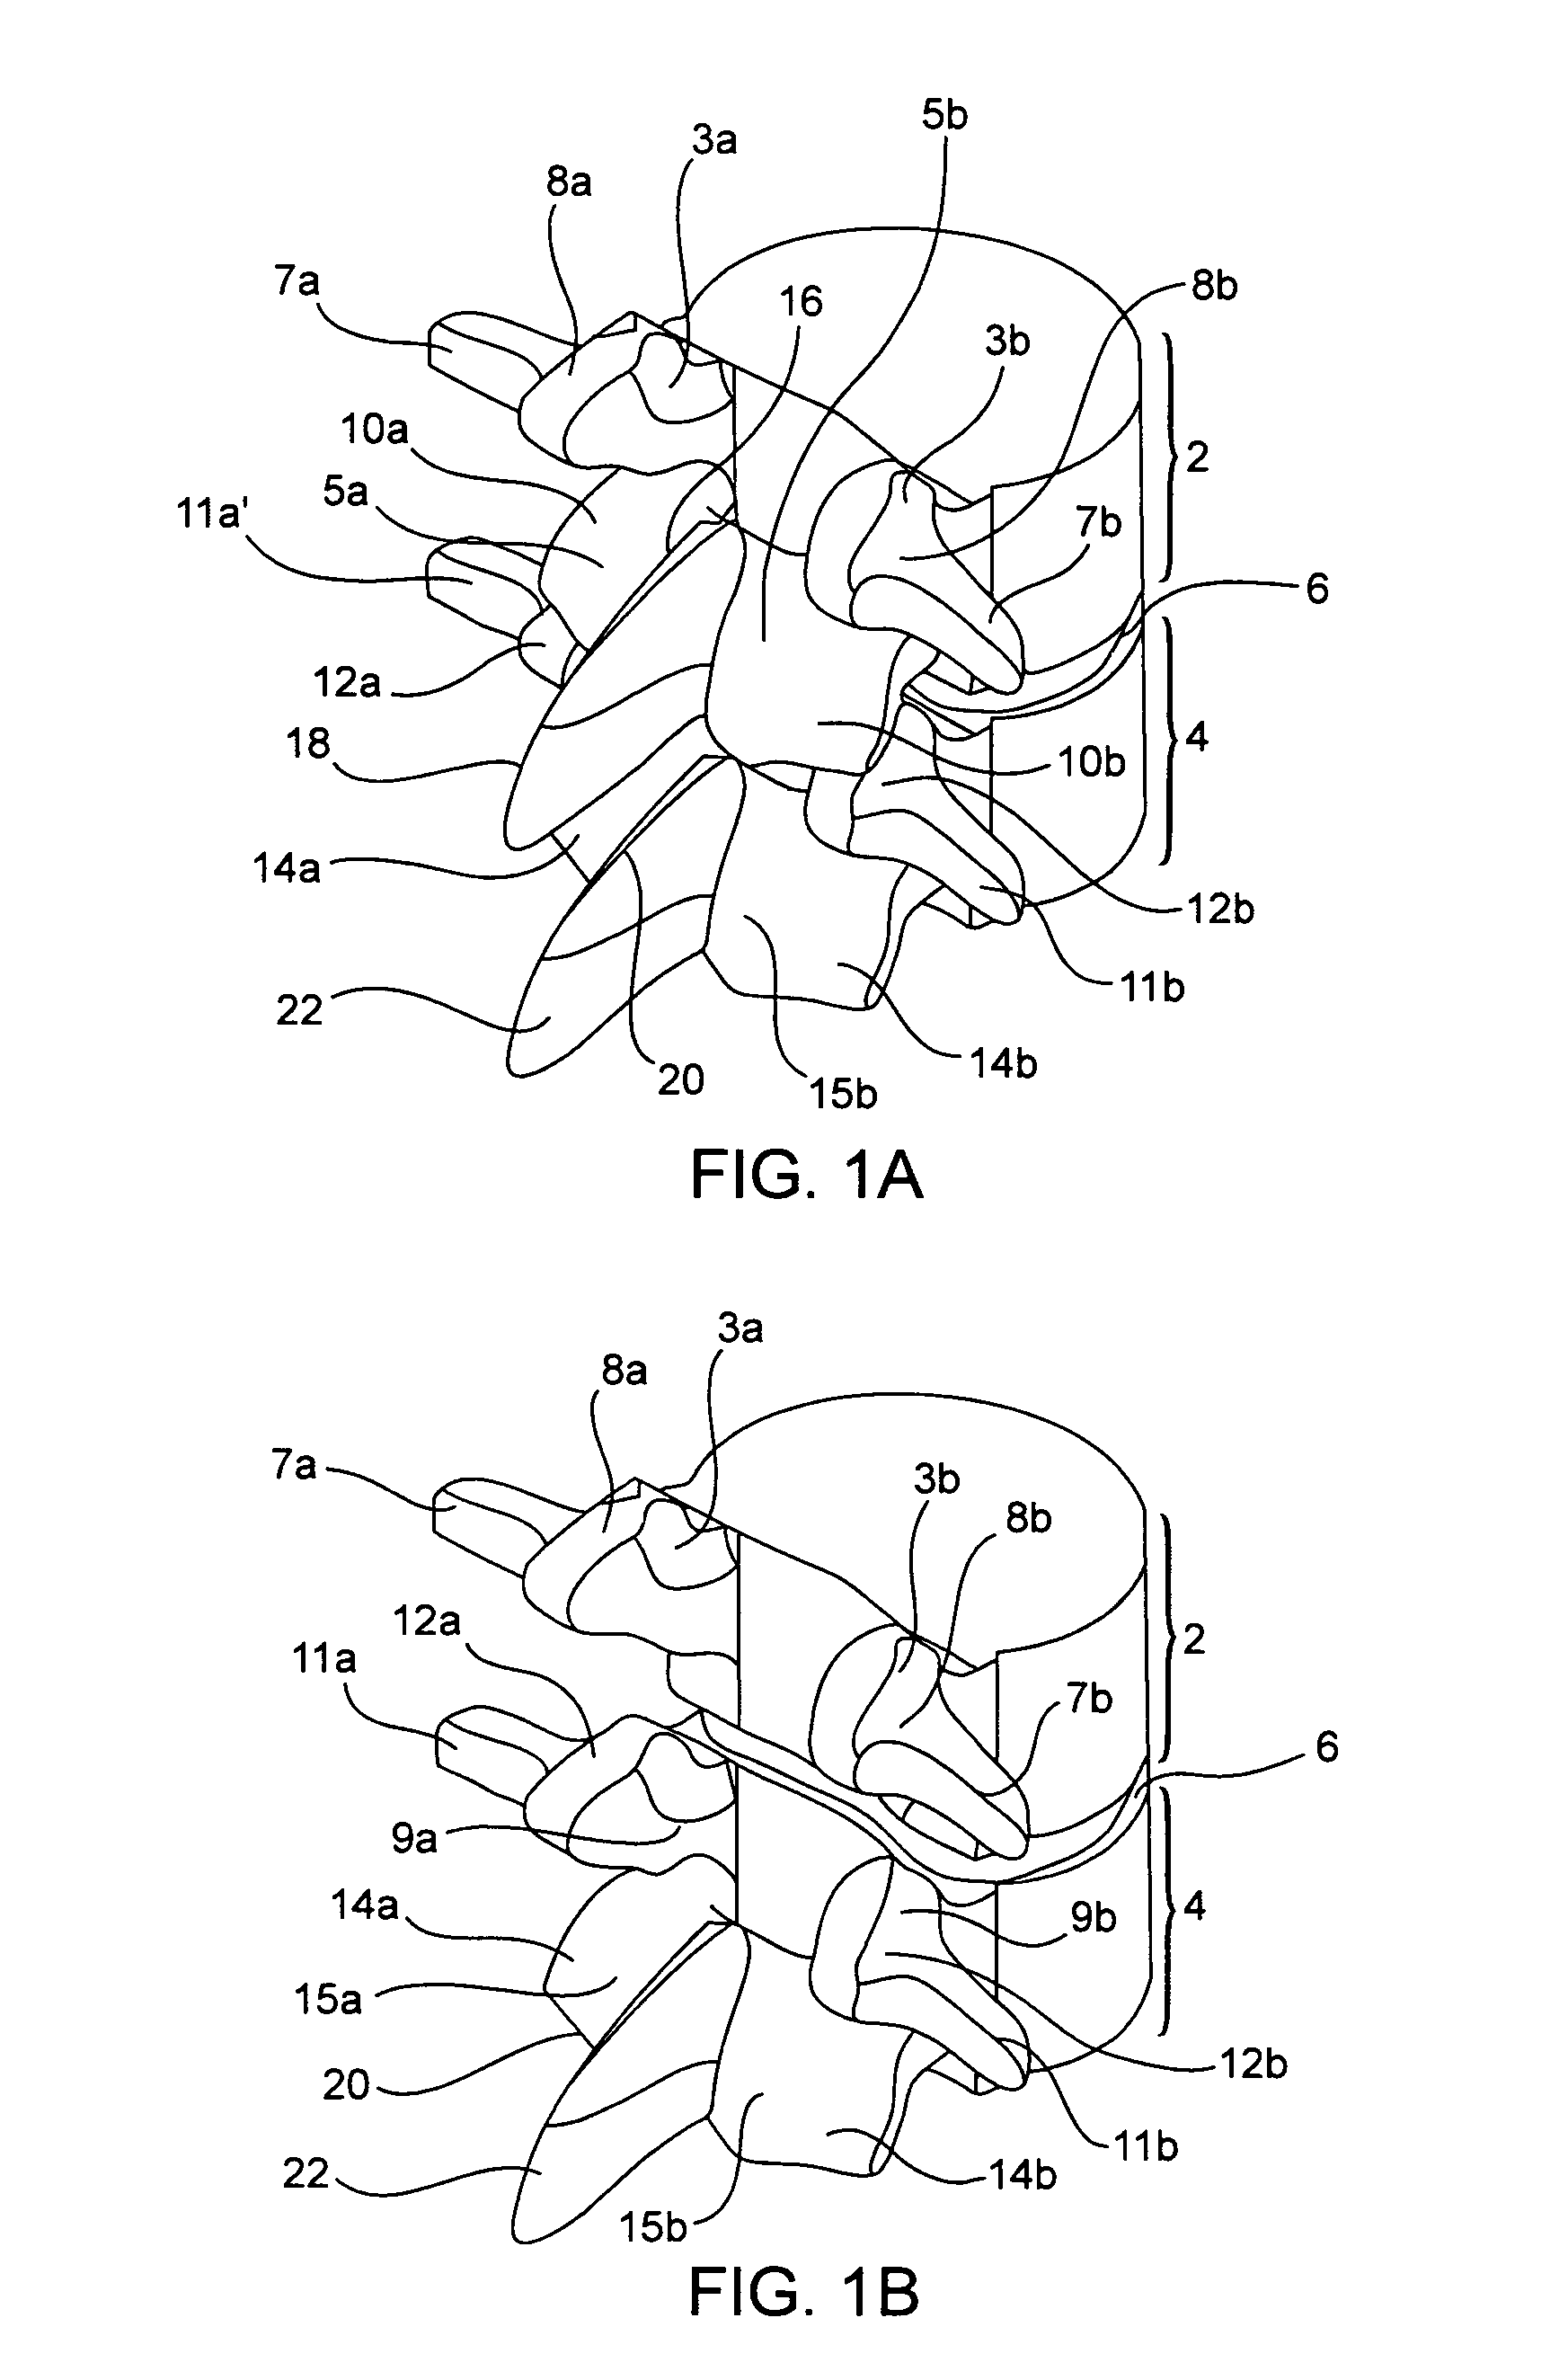 Systems and methods for stabilization of bone structures